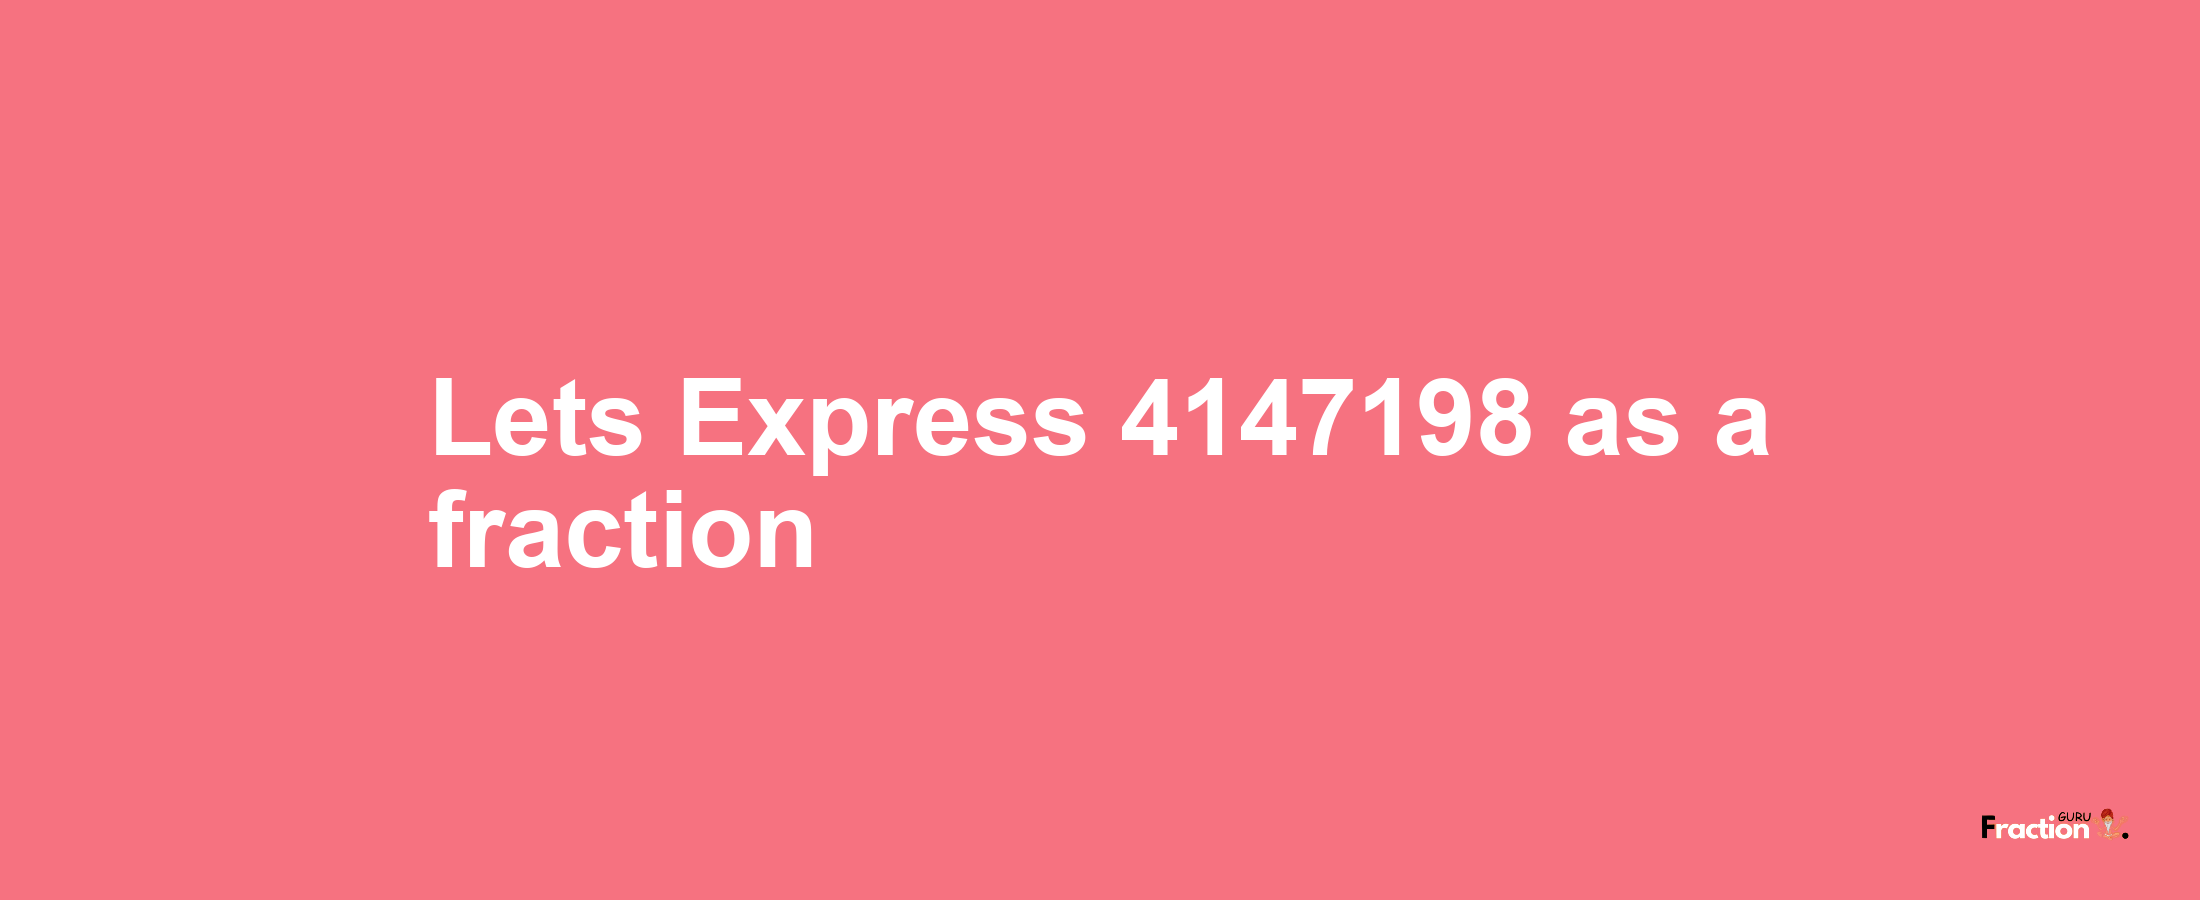 Lets Express 4147198 as afraction